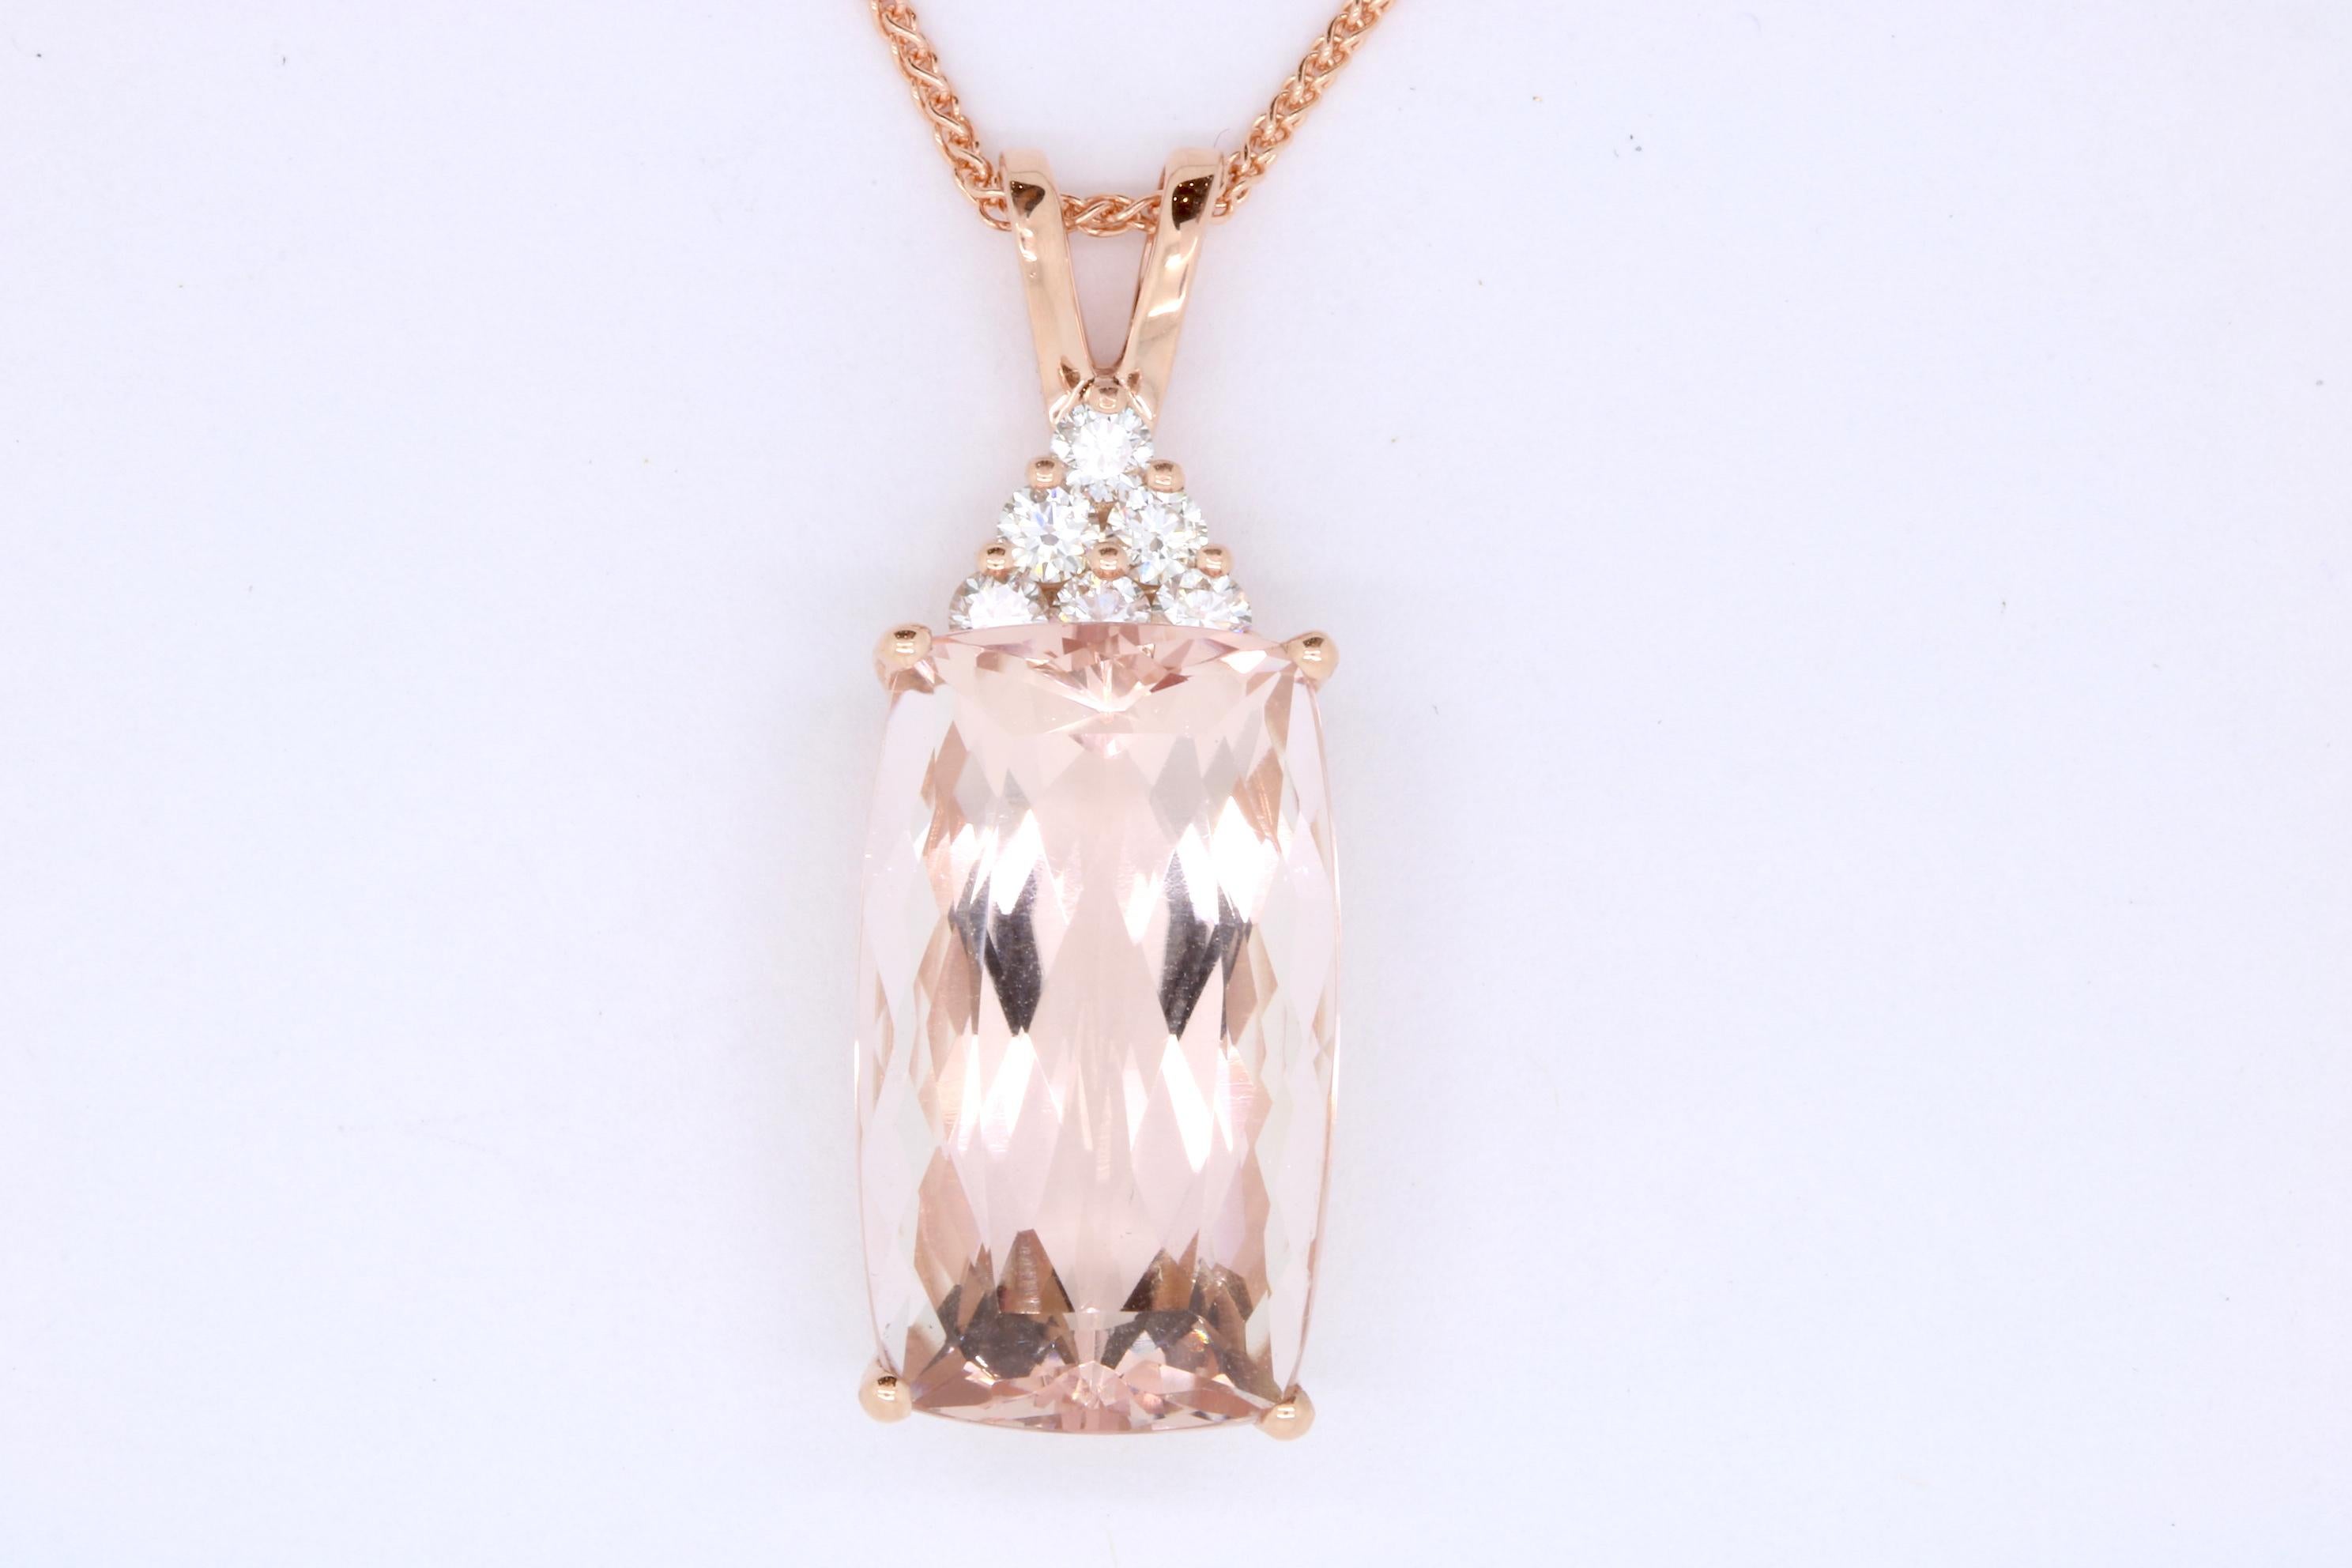 Material: 14k Rose Gold 
Center Stone Detail:  1 Cushion Cut Pink Morganite at 11.77 Carats
Stone Details:  6 Round White Diamonds at 0.31 Carats - Clarity: SI / Color: H-I
Length:  18 Inches

Fine one-of-a-kind craftsmanship meets incredible